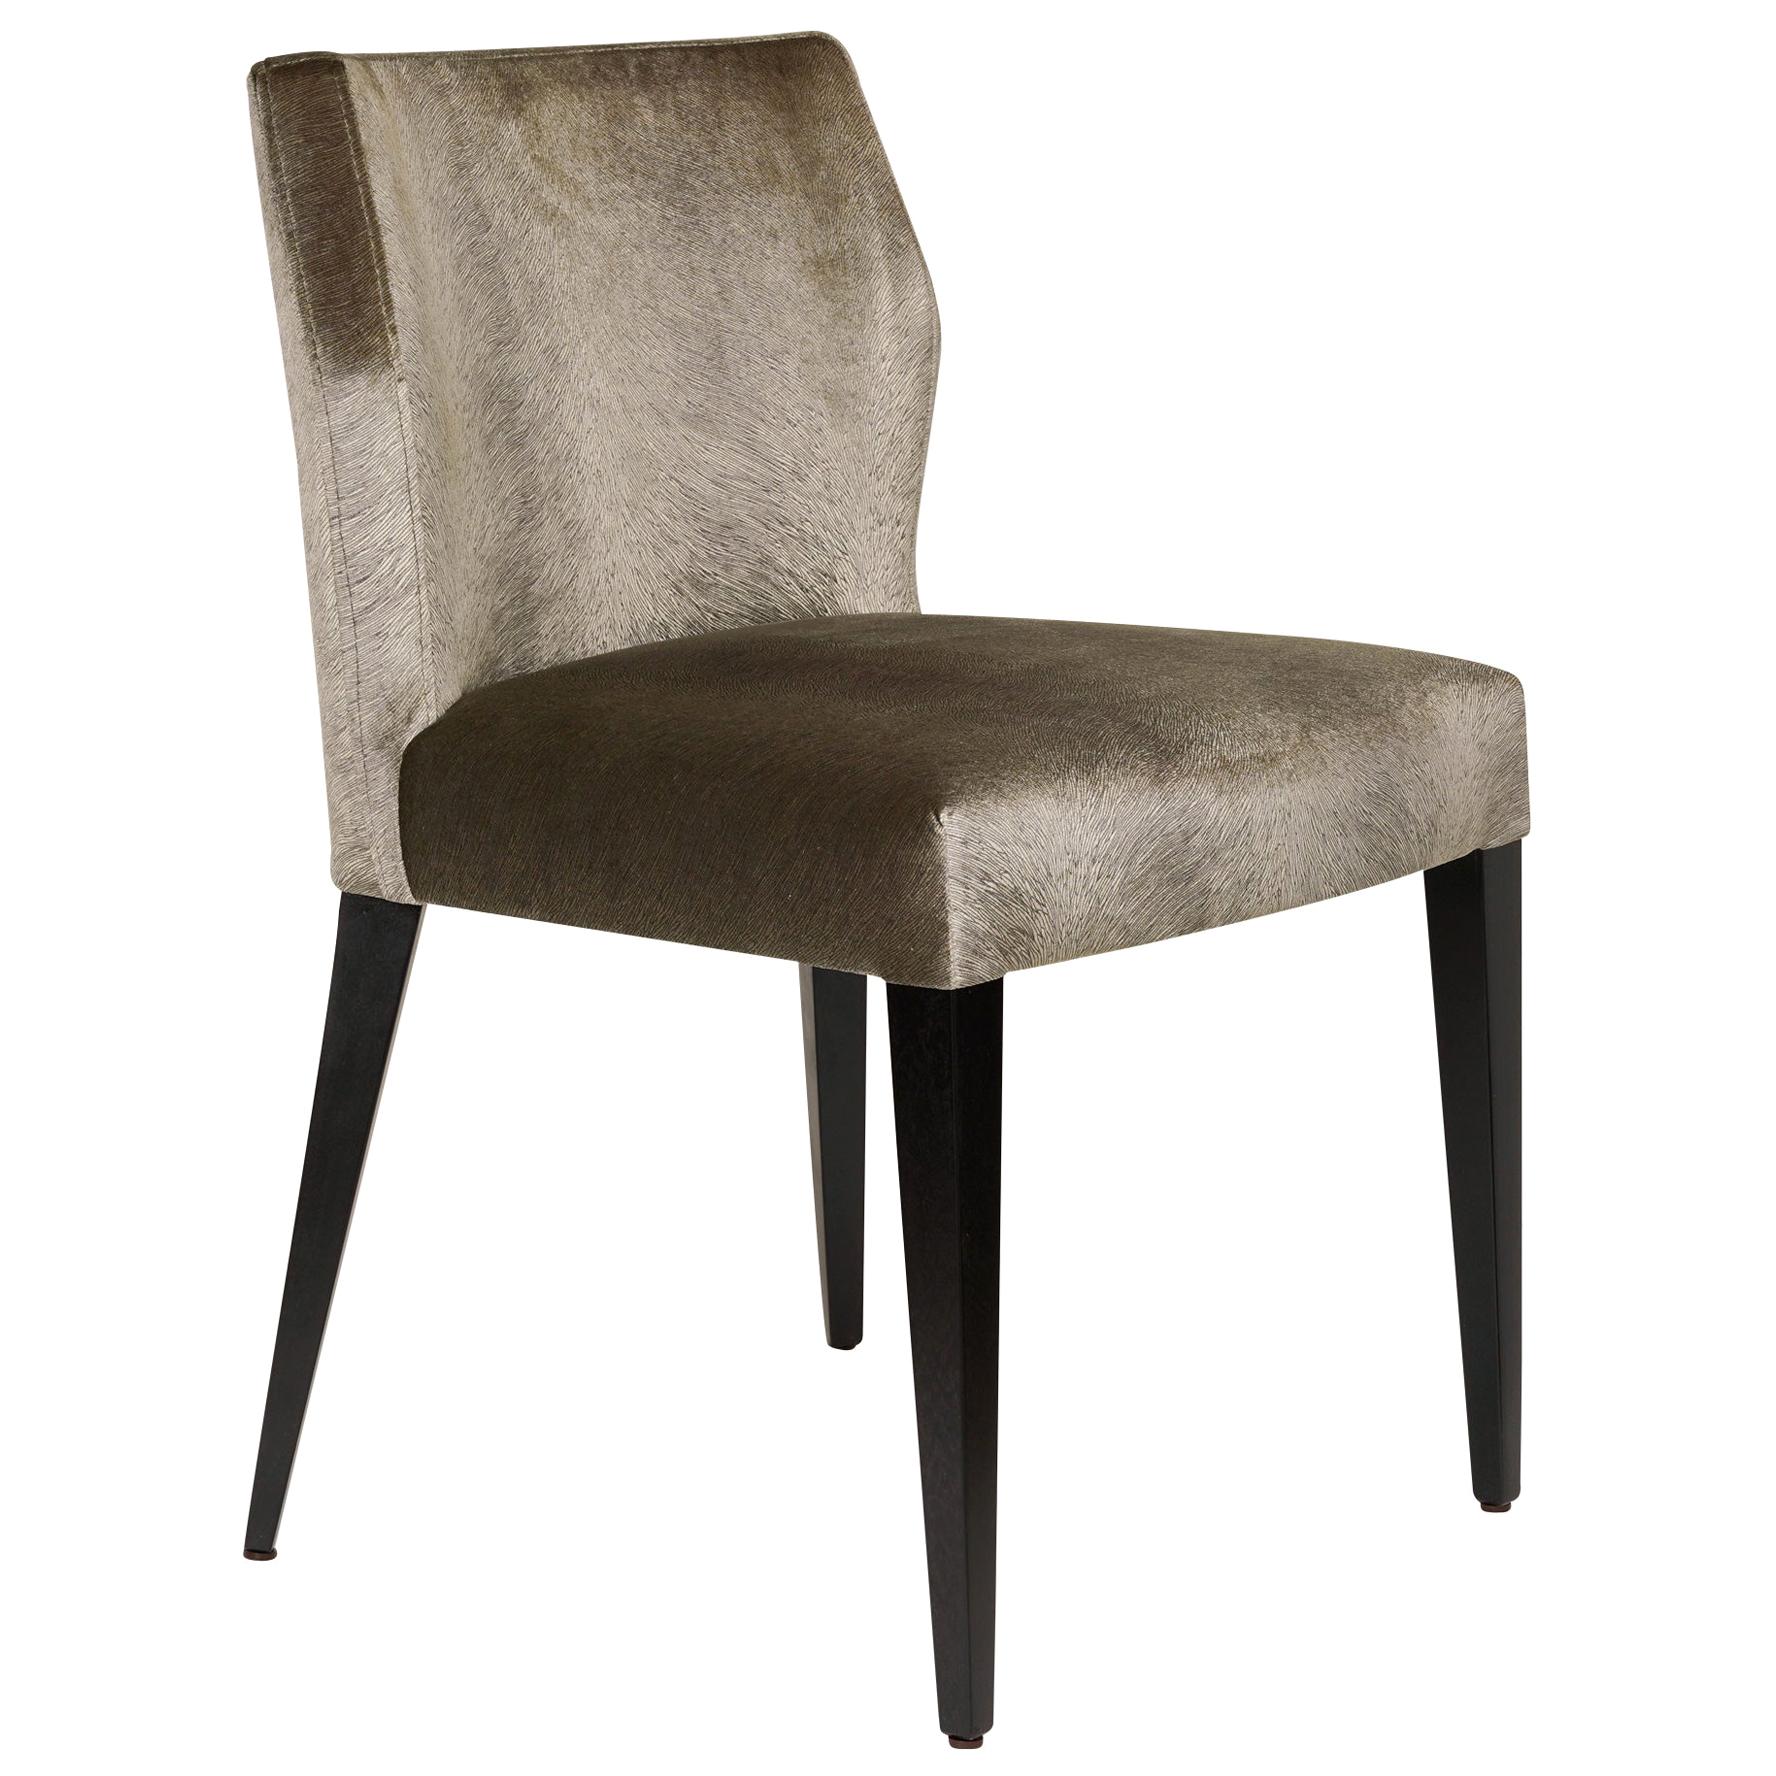 Katy Dining Chair For Sale